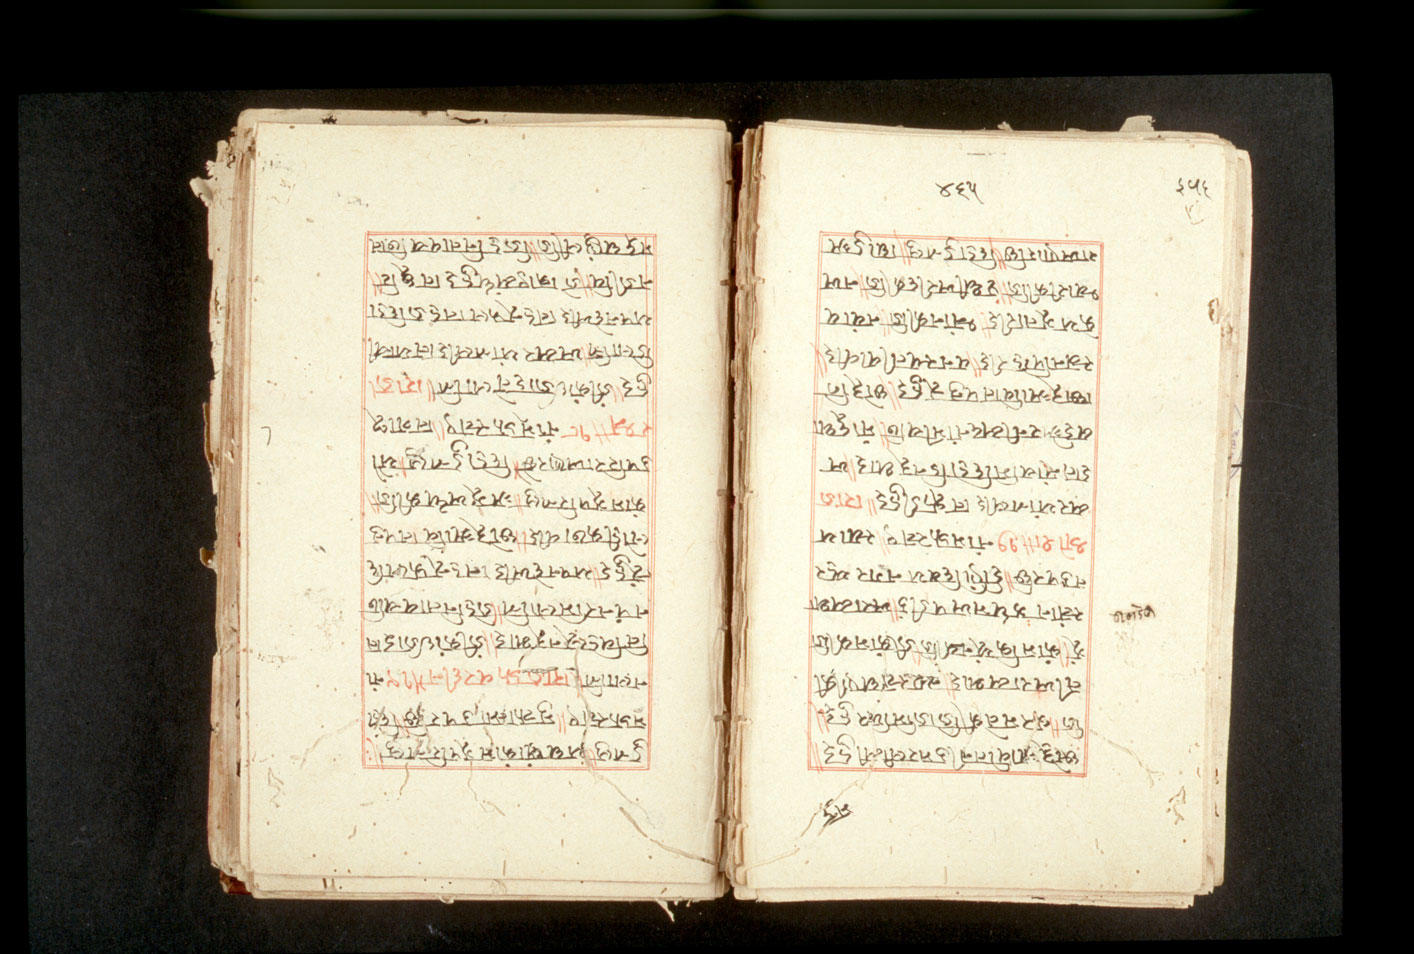 Folios 465v (right) and 466r (left)